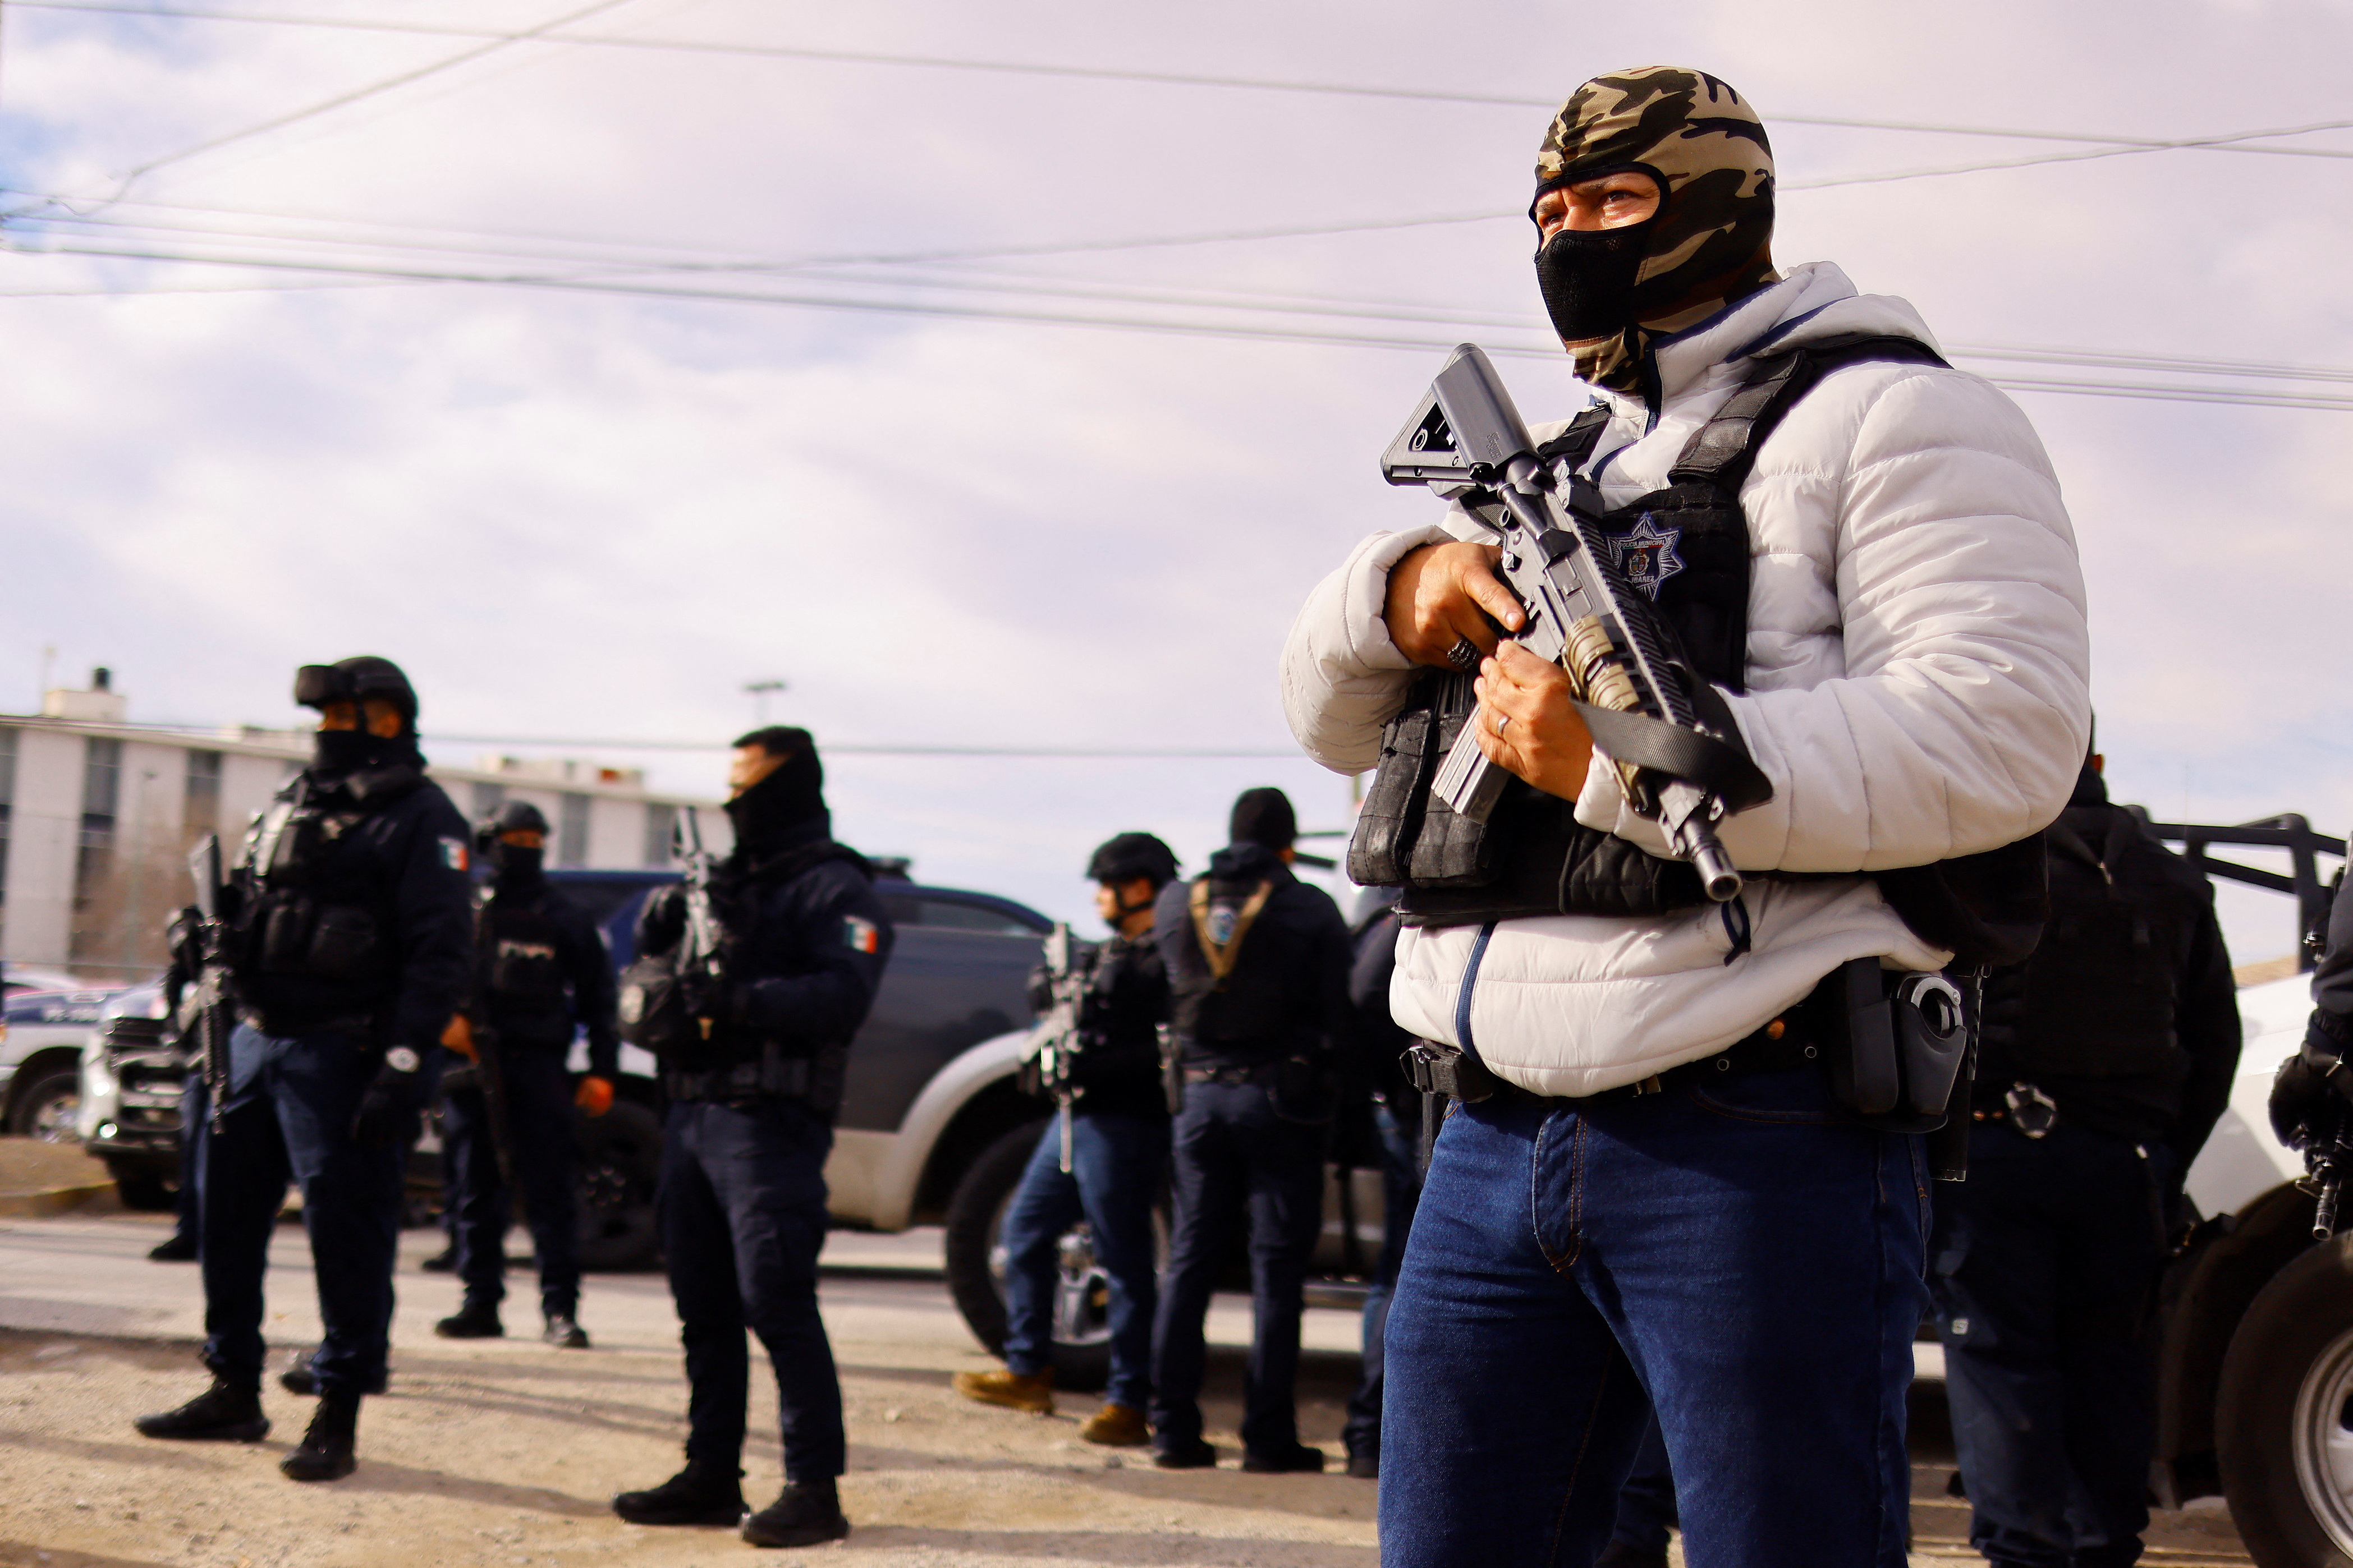 Security forces arrive to the Cereso number 3 state prison after unknown assailants entered the prison and freed several inmates, resulting in injuries and deaths, according to local media, in Ciudad Juarez, Mexico January 1, 2023. REUTERS /Jose Luis Gonzalez